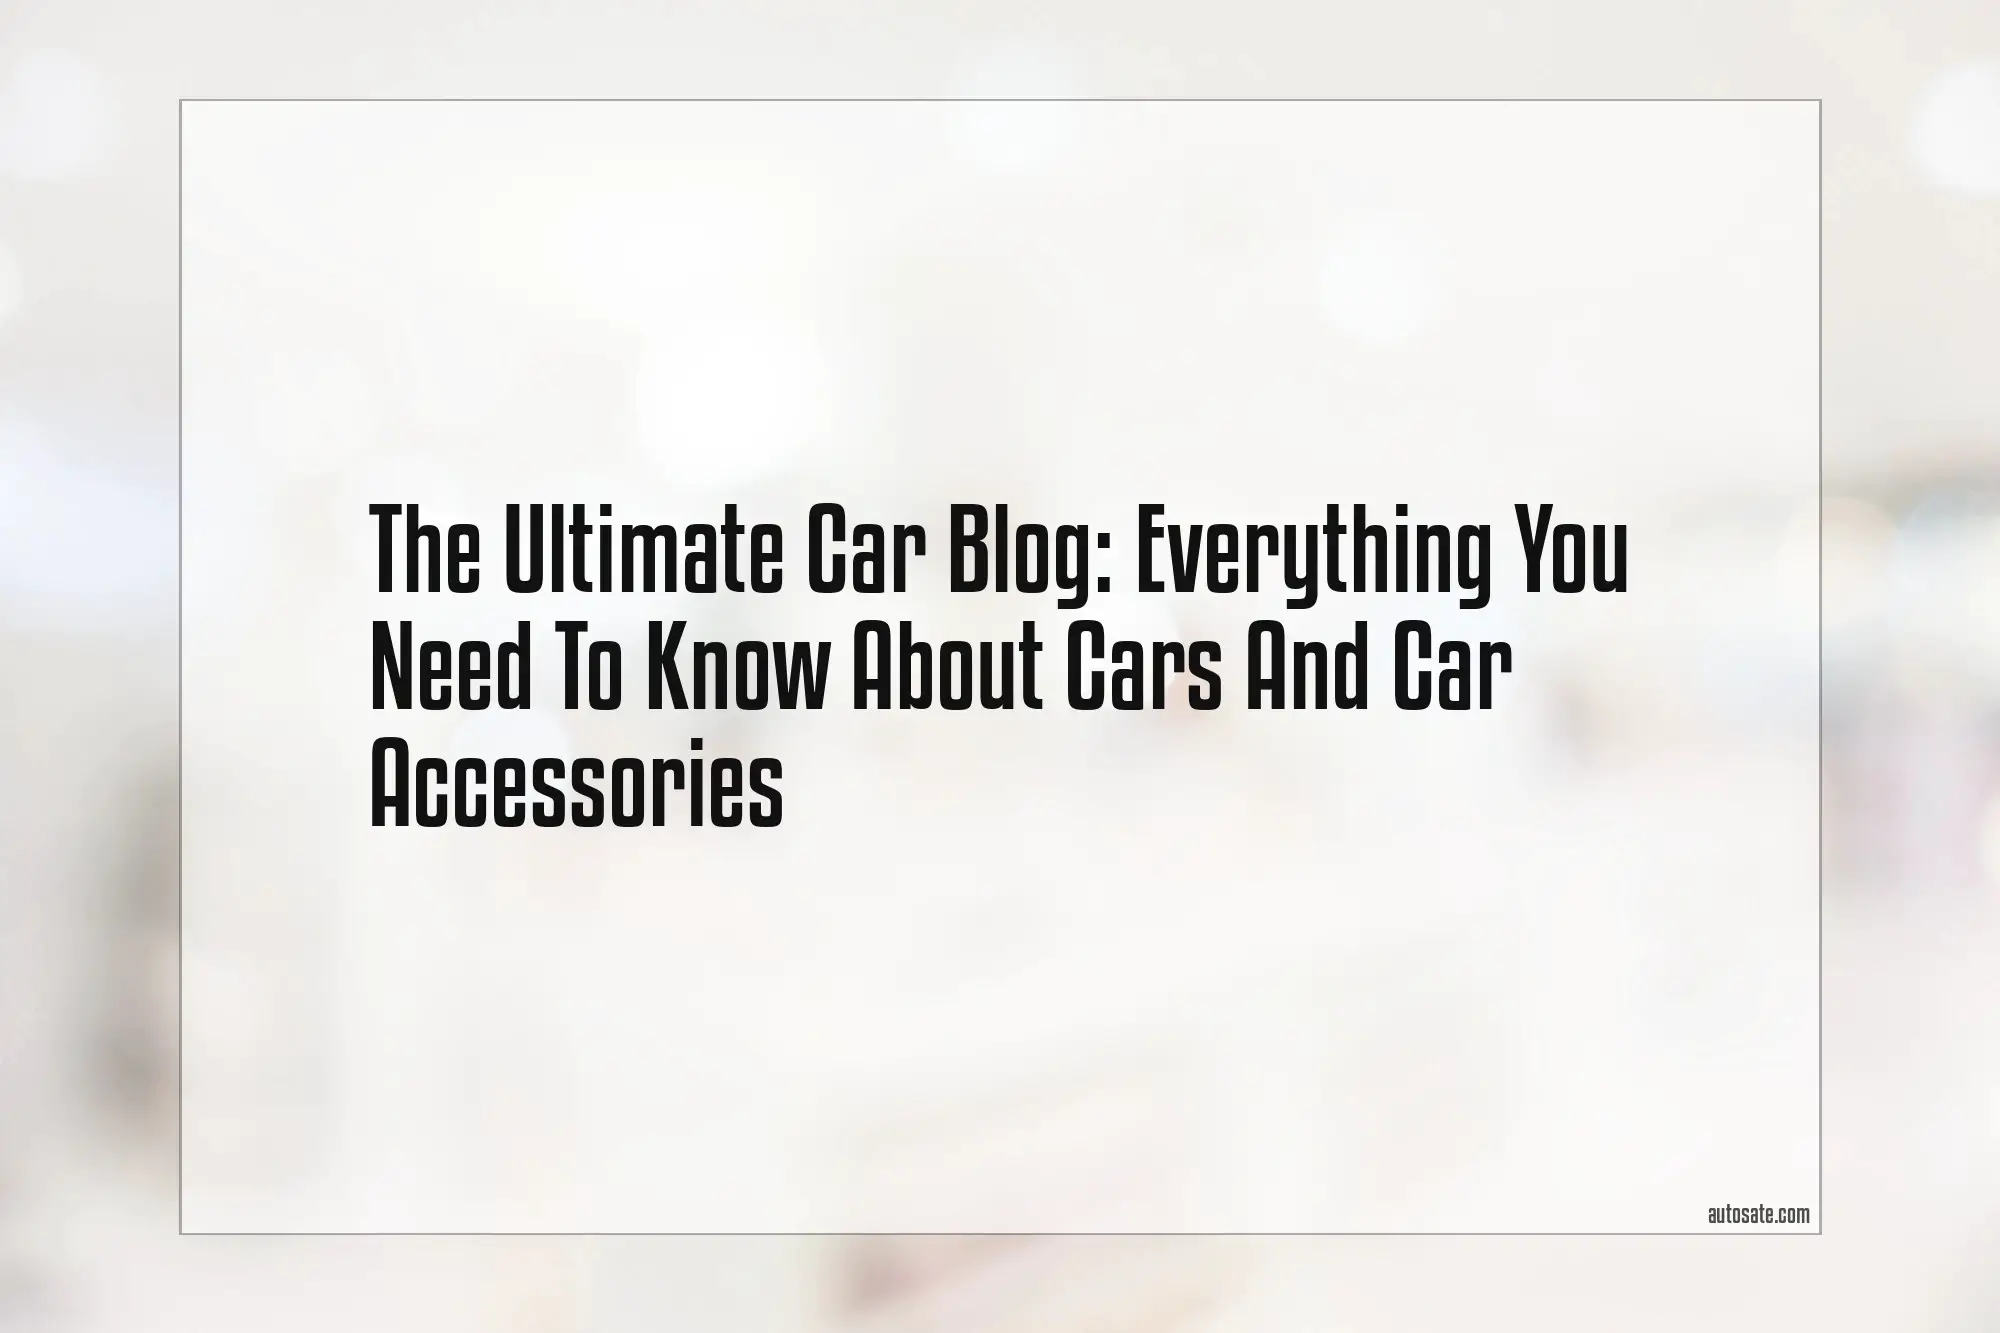 The Ultimate Car Blog: Everything You Need To Know About Cars And Car Accessories